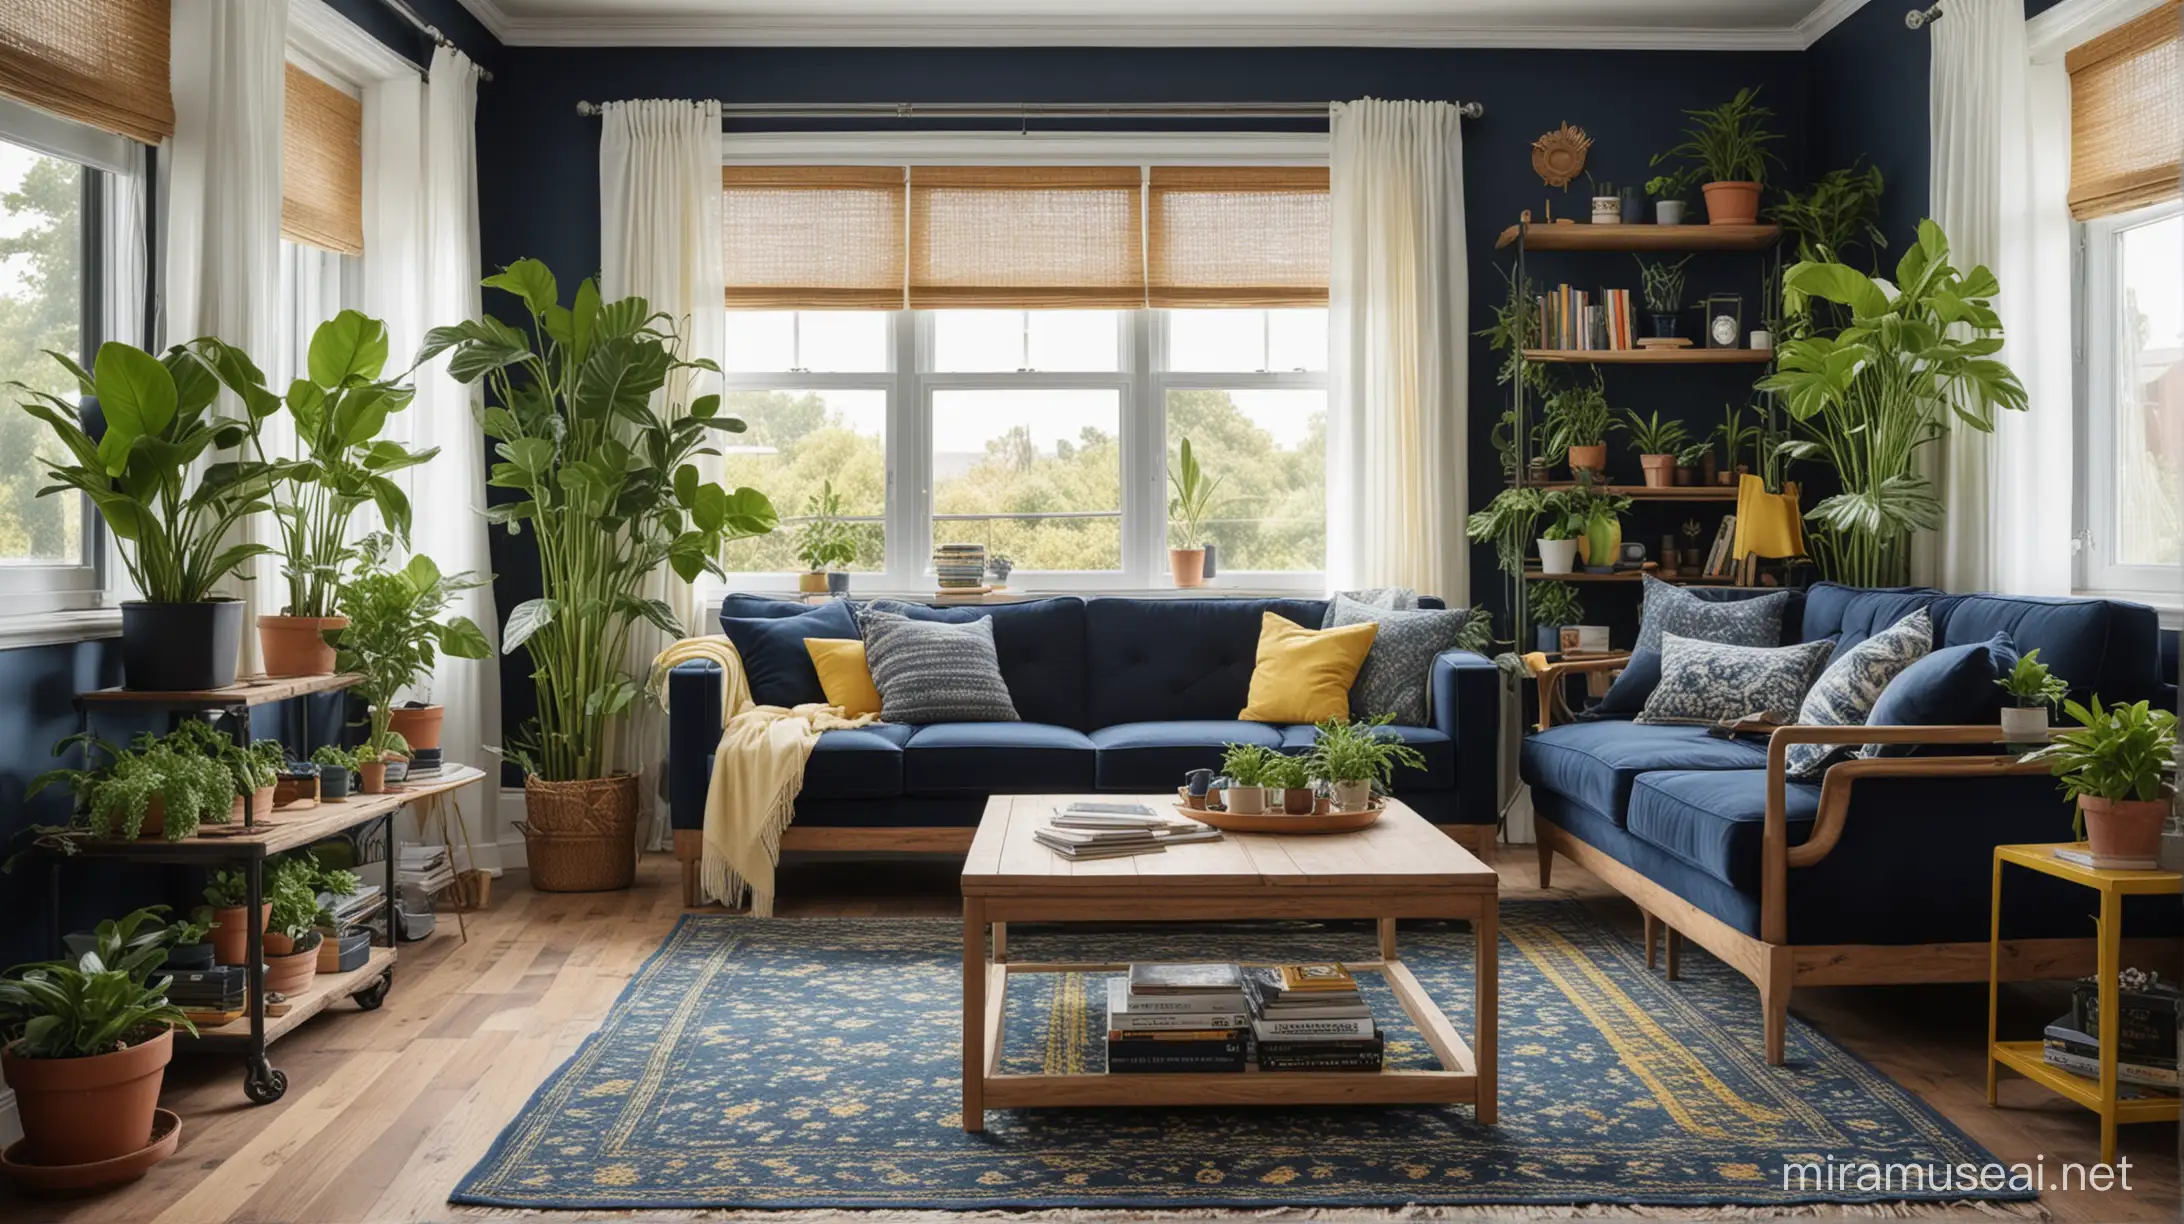 generate navy blue living room with lots of green house plants, shelves, industrial style and wood, and dark navy blue sofa, yellow chair and boho navu blue and yellow carpet, wooden coffee table, and sunset light coming from the window, and white transparent curtains on the windows, and industrial ceiling lamp with plants on it